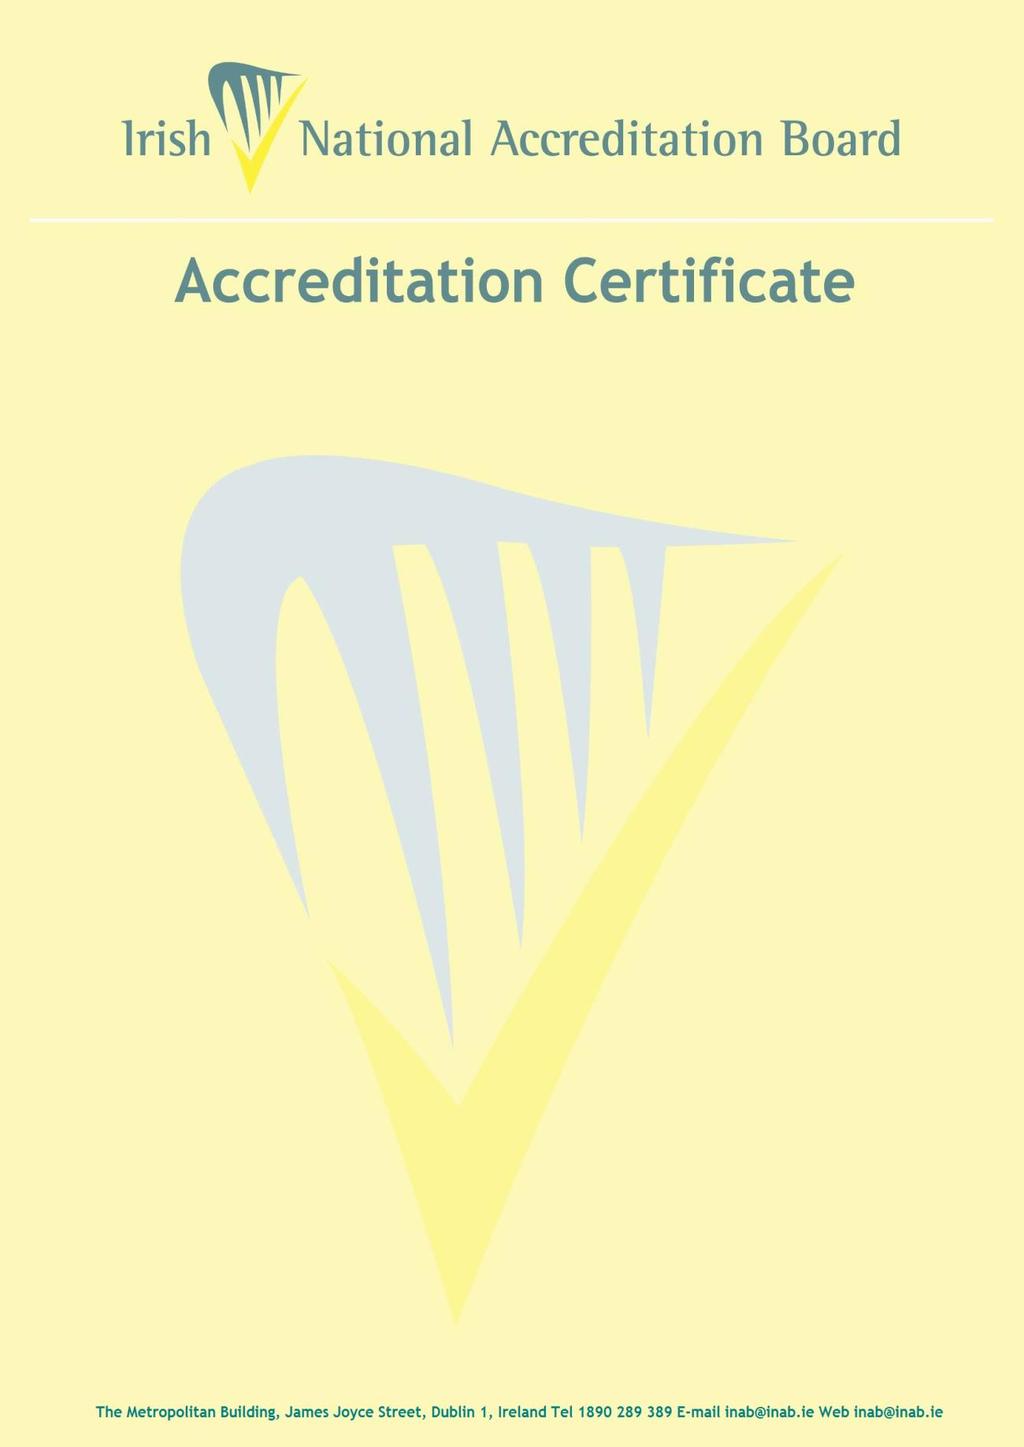 Pathology Laboratory Registration number: 212MT is accredited by the Irish National Board () to undertake testing as detailed in the Schedule bearing the Registration detailed above, in compliance